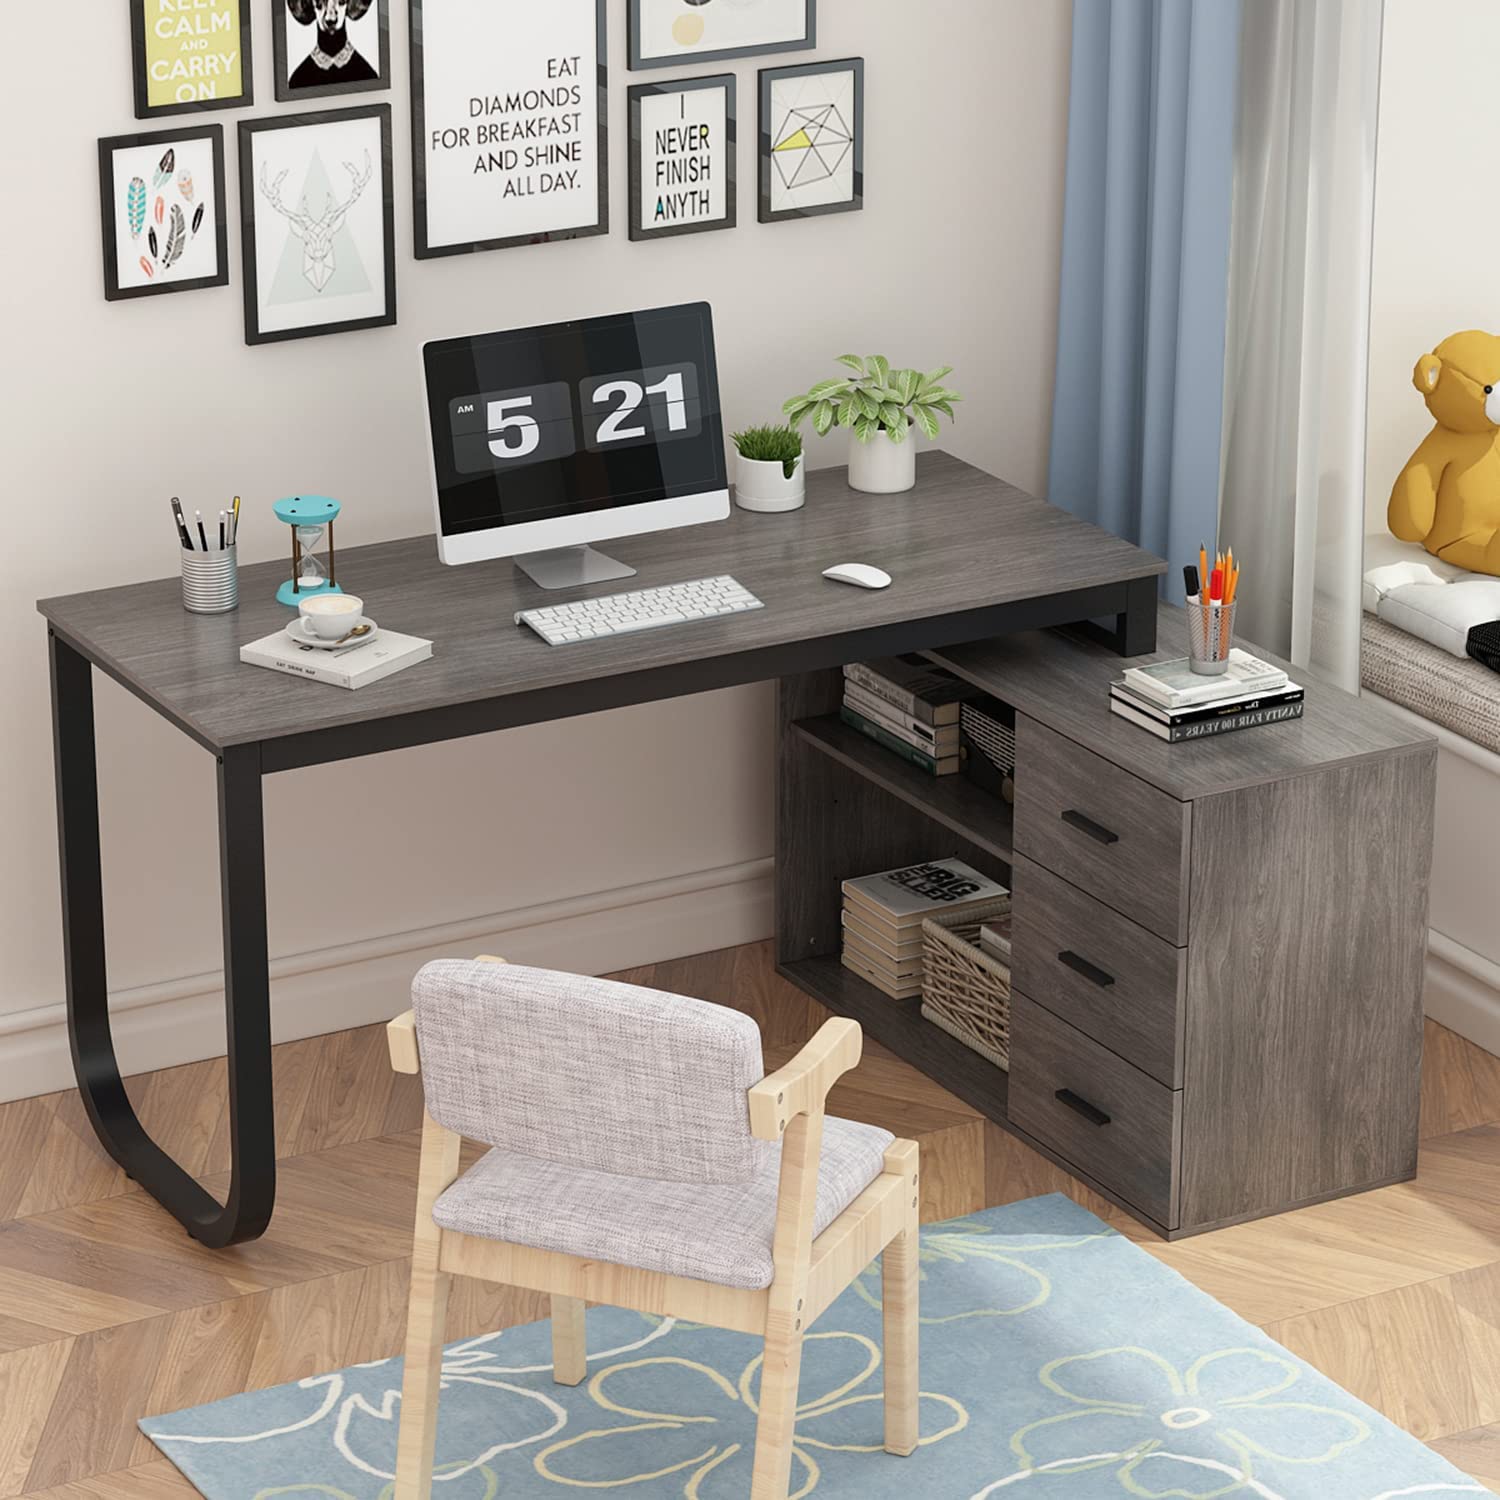 Home Office Computer Desk Corner Desk with 3 Drawers and 2 Shelves, 55 Inch Large L-Shaped Study Writing Table with Storage Cabinet